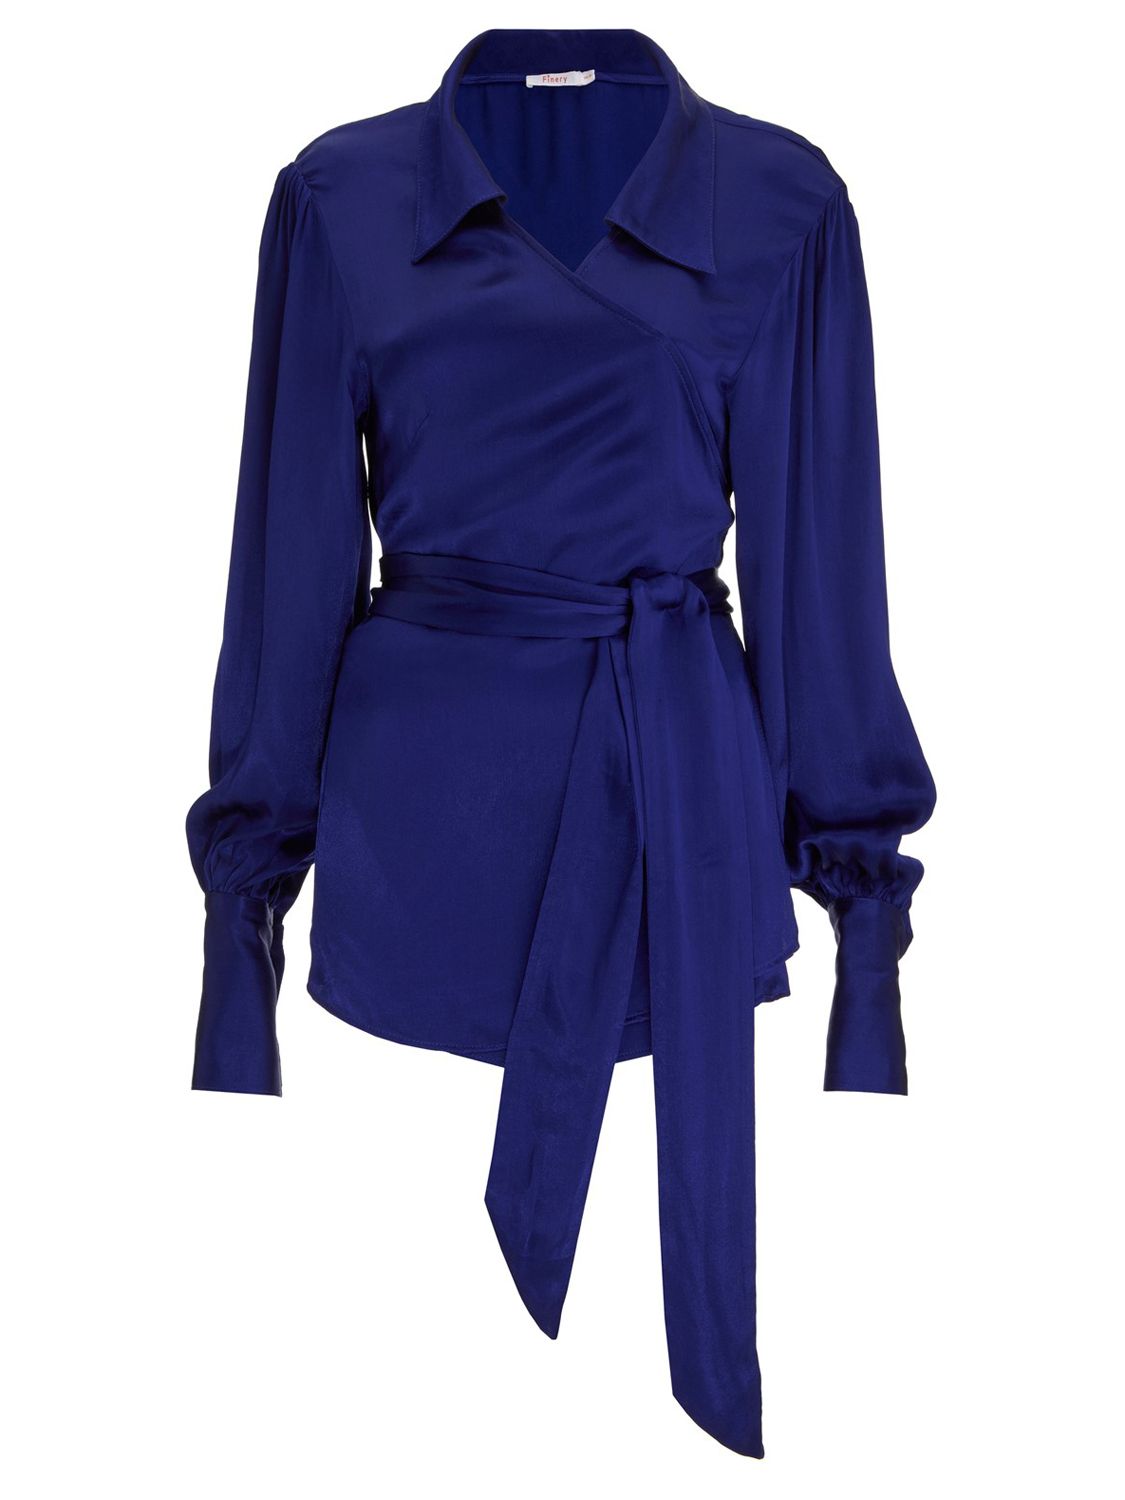 Finery Reeve Satin Wrap Top, Bright Blue